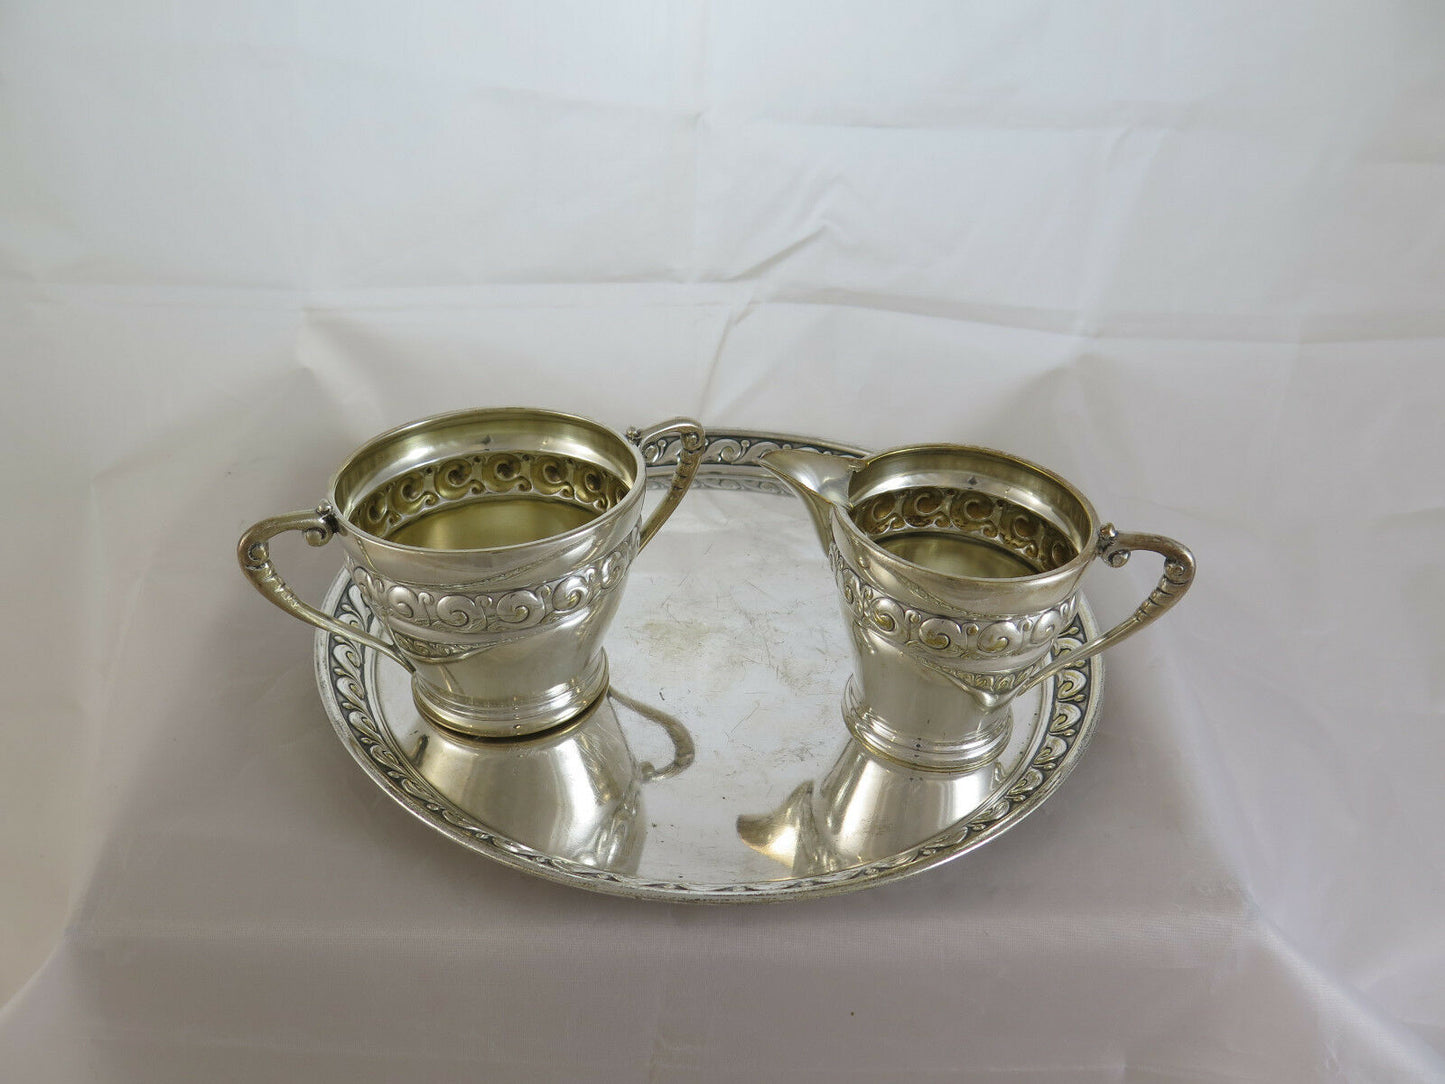 TEA SERVICE CONSISTING OF M&amp;TB COFFEE POT AND ENERET DENMARK DENMARK R69